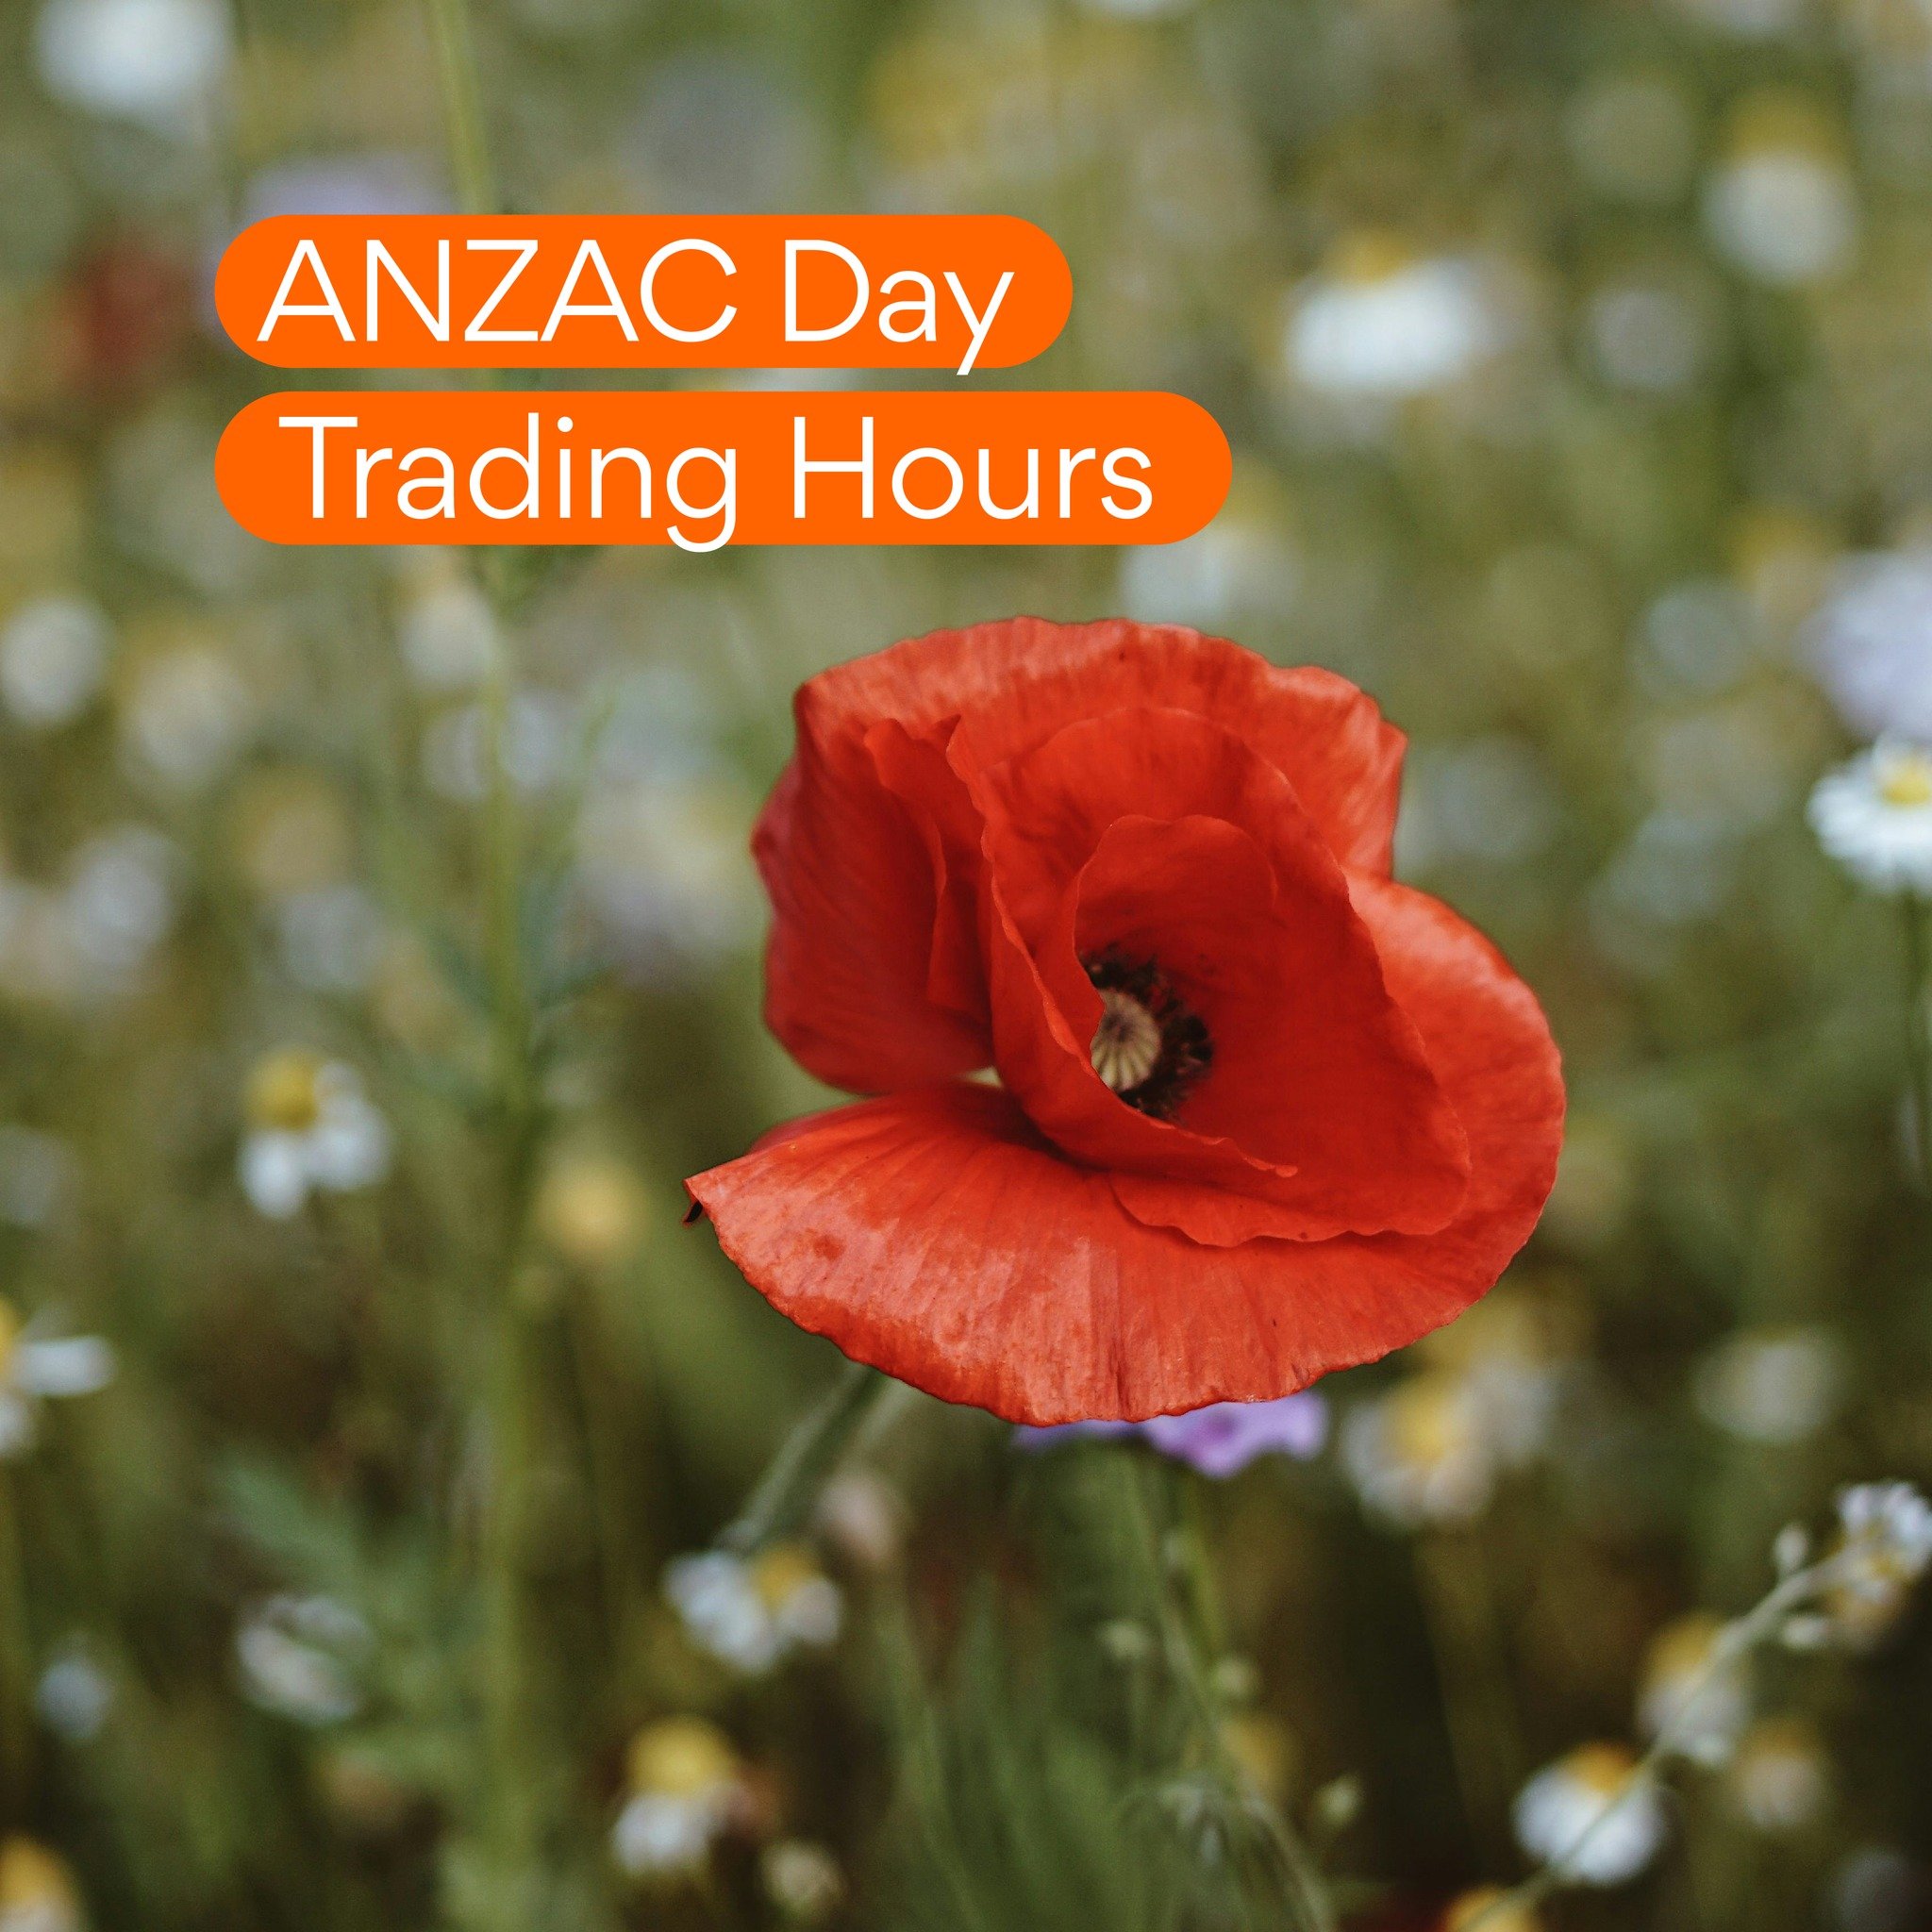 Yanchep Village will be closed on April 25 in honour of ANZAC Day.

ANZAC Day is a solemn day of remembrance of those Australian and New Zealand Soldiers who have served, fought and died for their country.

Lest we forget.